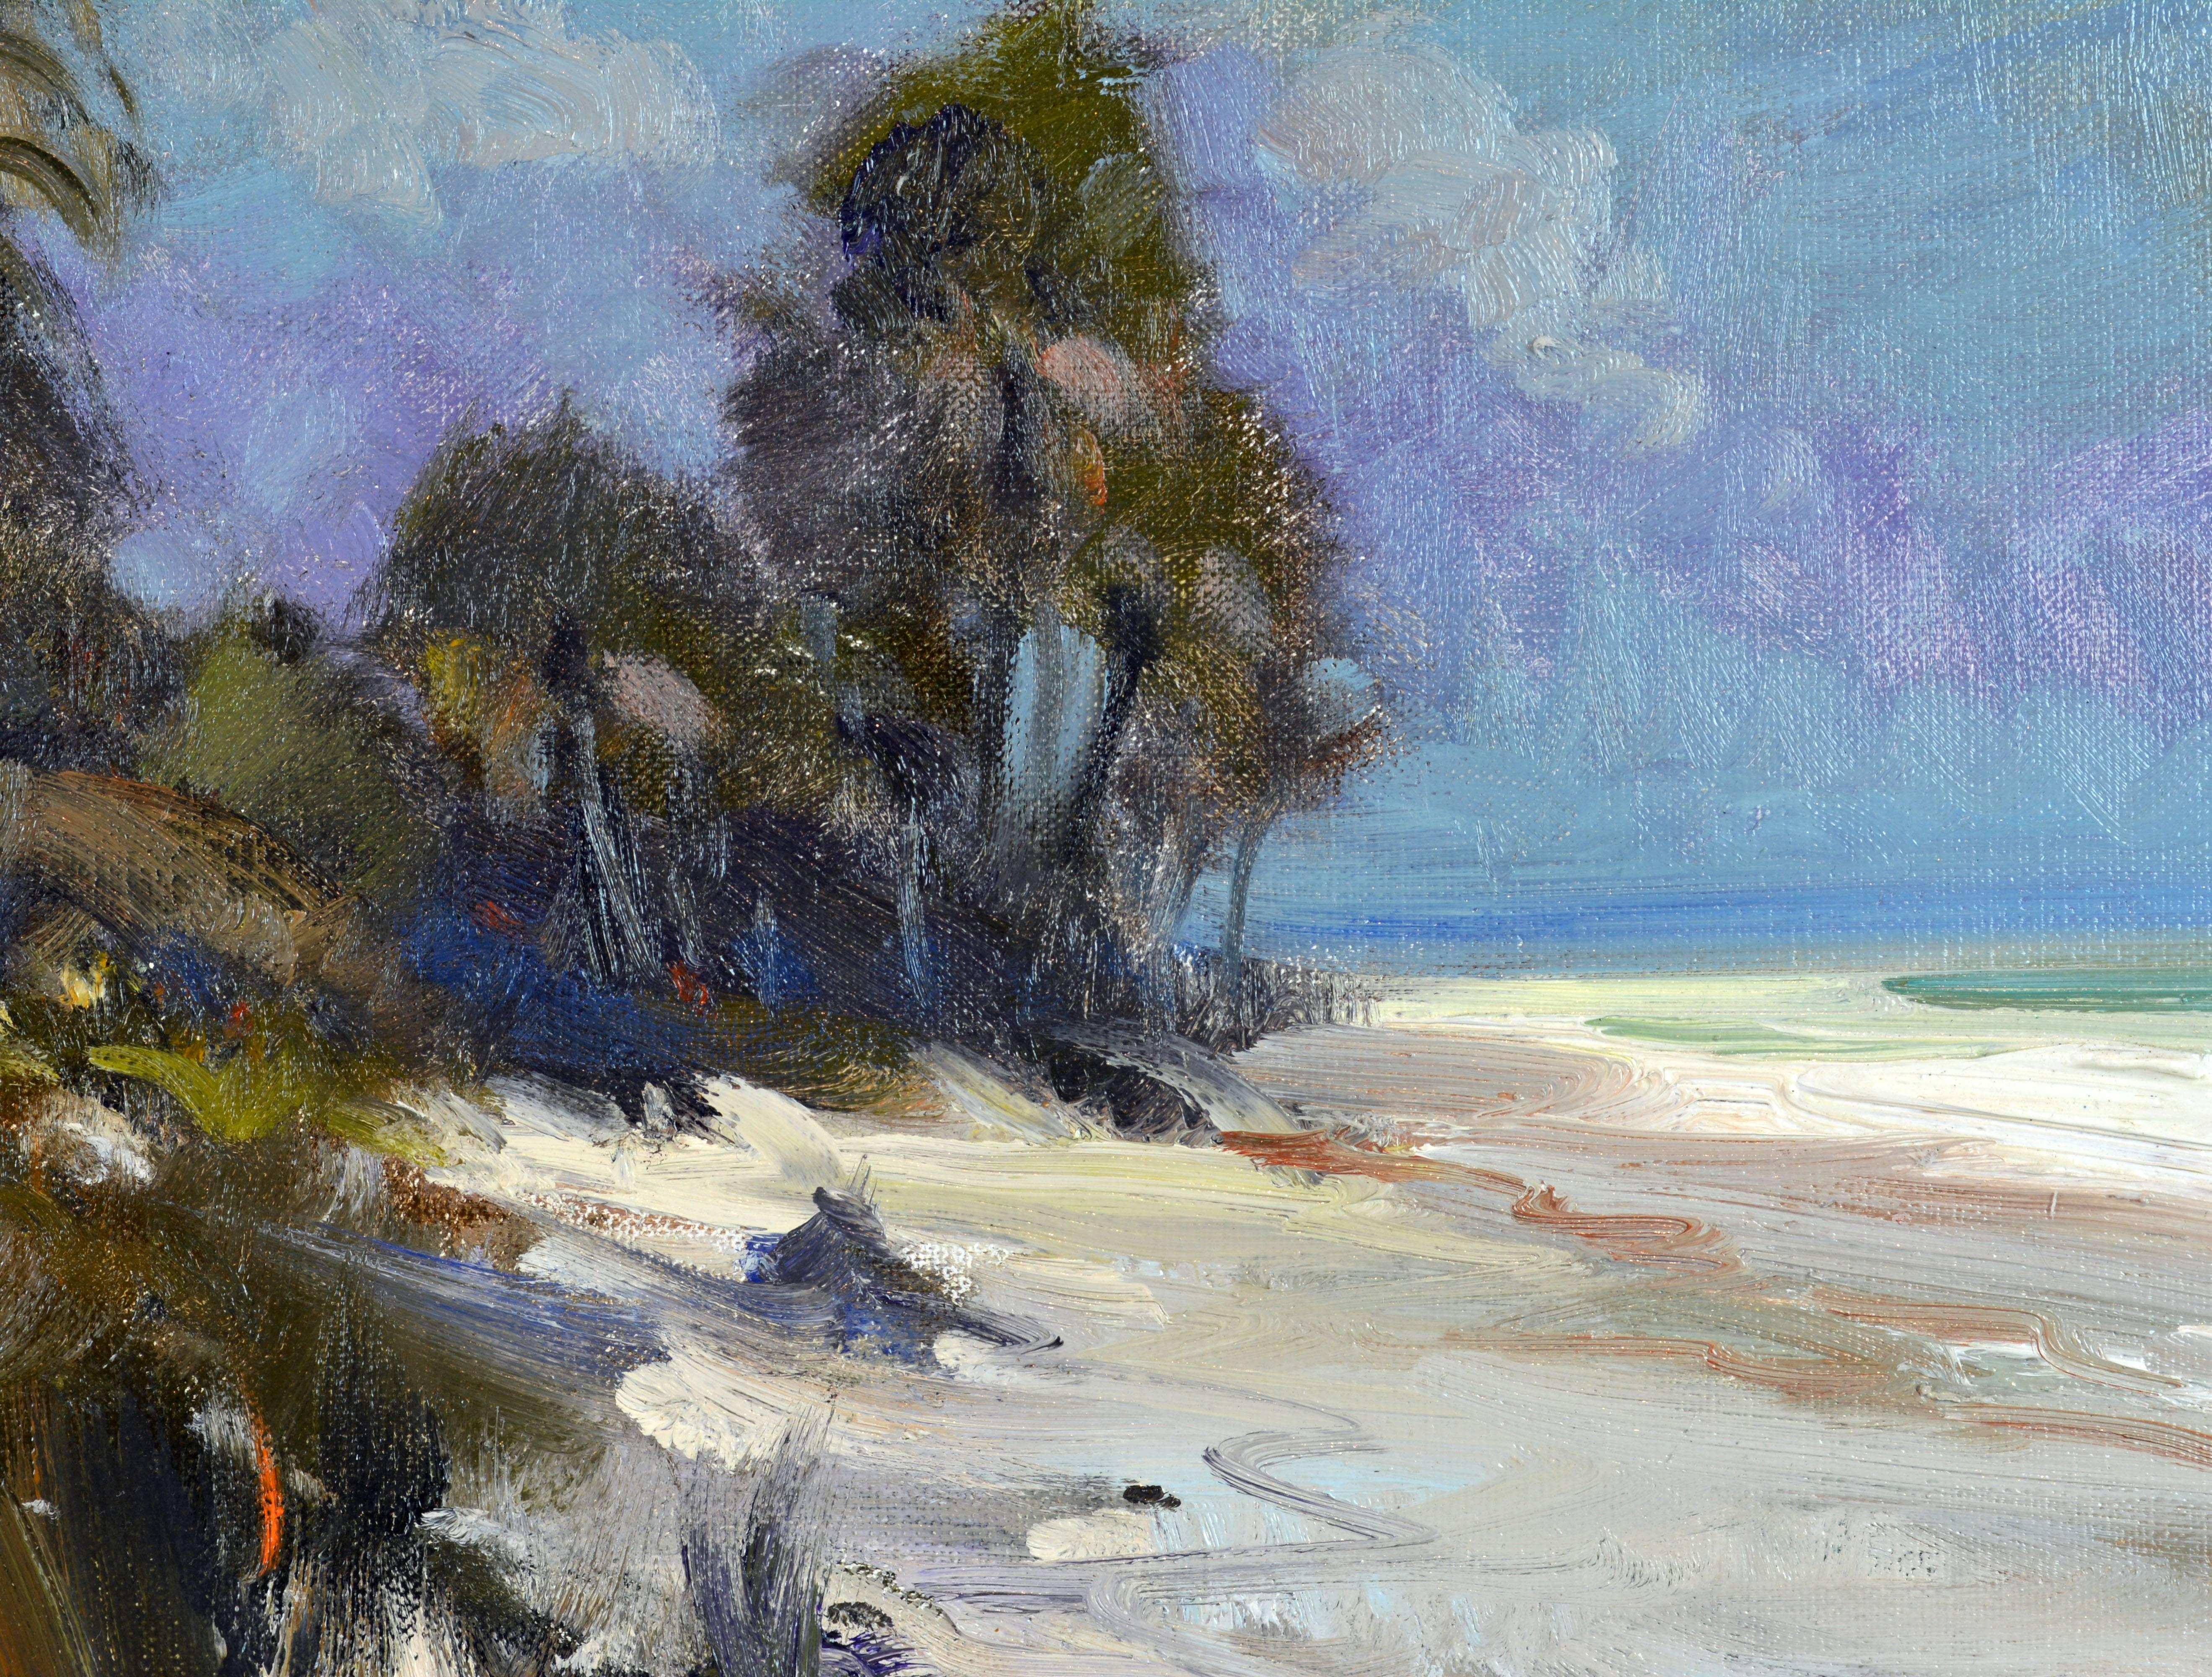 Wood 'Sable Palms' Florida Impressionism by Robert C. Gruppe, American